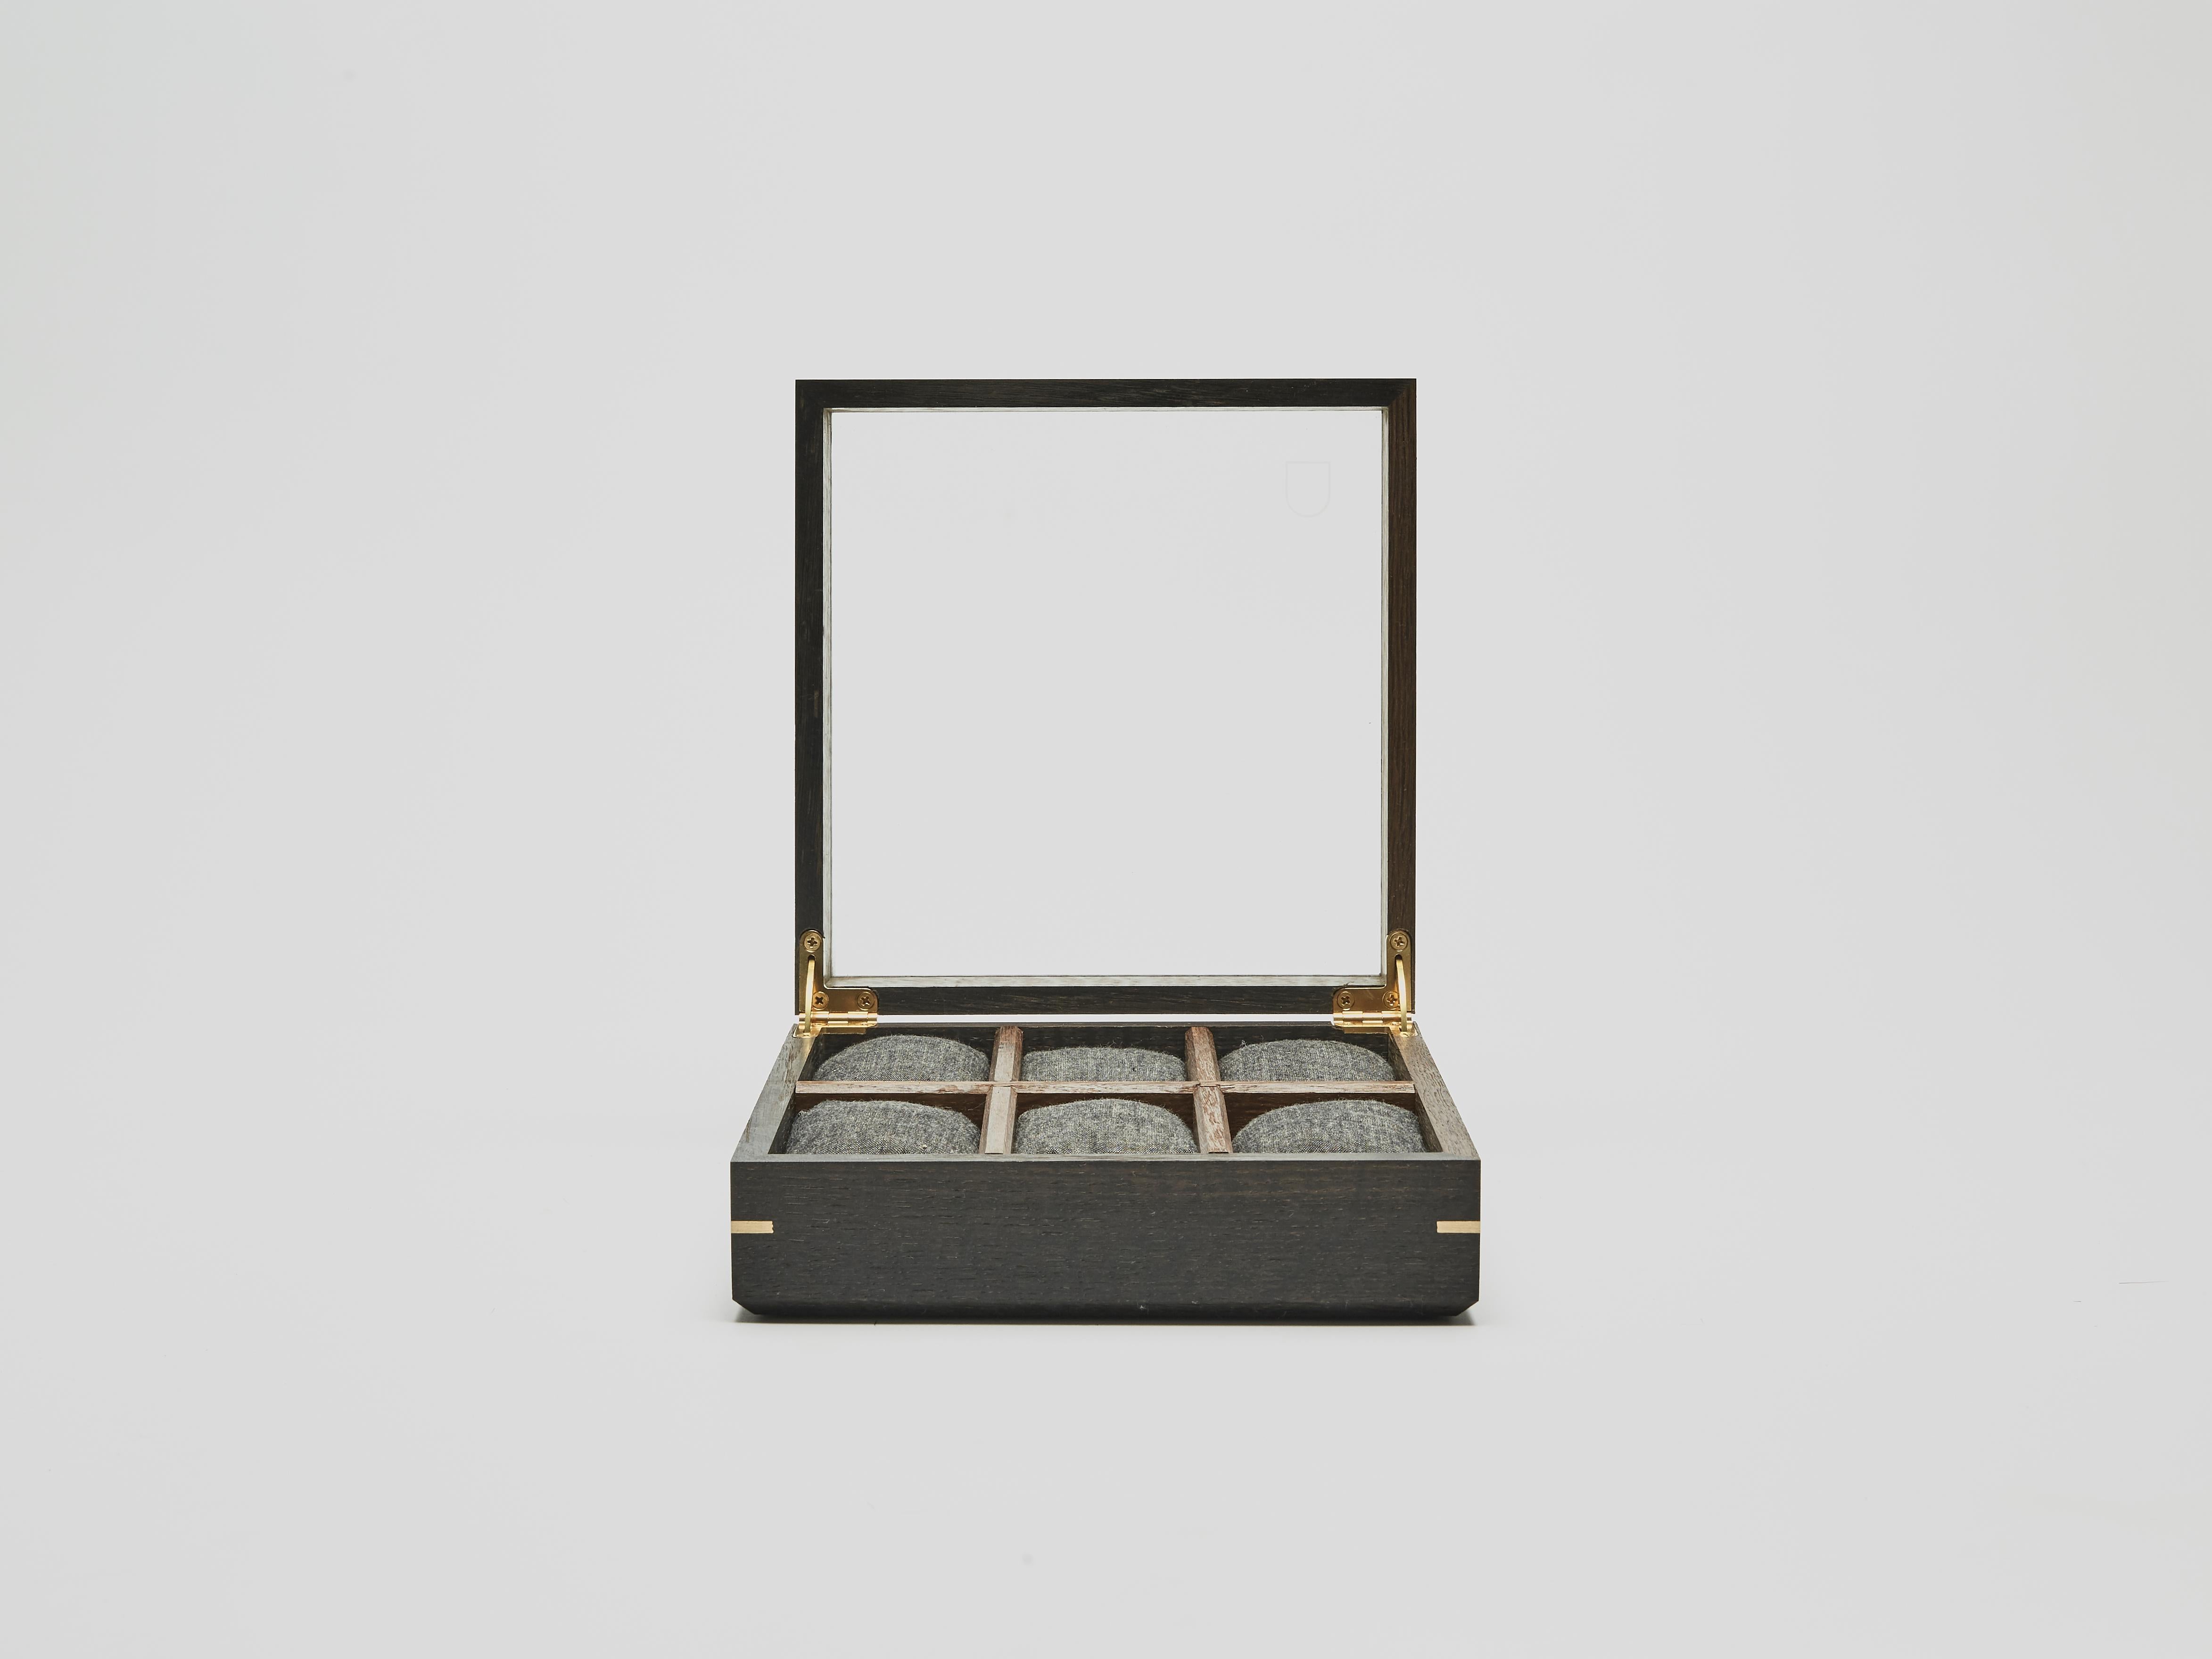 Collection Nr3, six watch box made from hardened glass and a solid bog-oak wood frame. Detailed with brass finger joints and hinges. Each product houses, three, six or ten watches at a time. They have plump cotton pillows to hold your watch